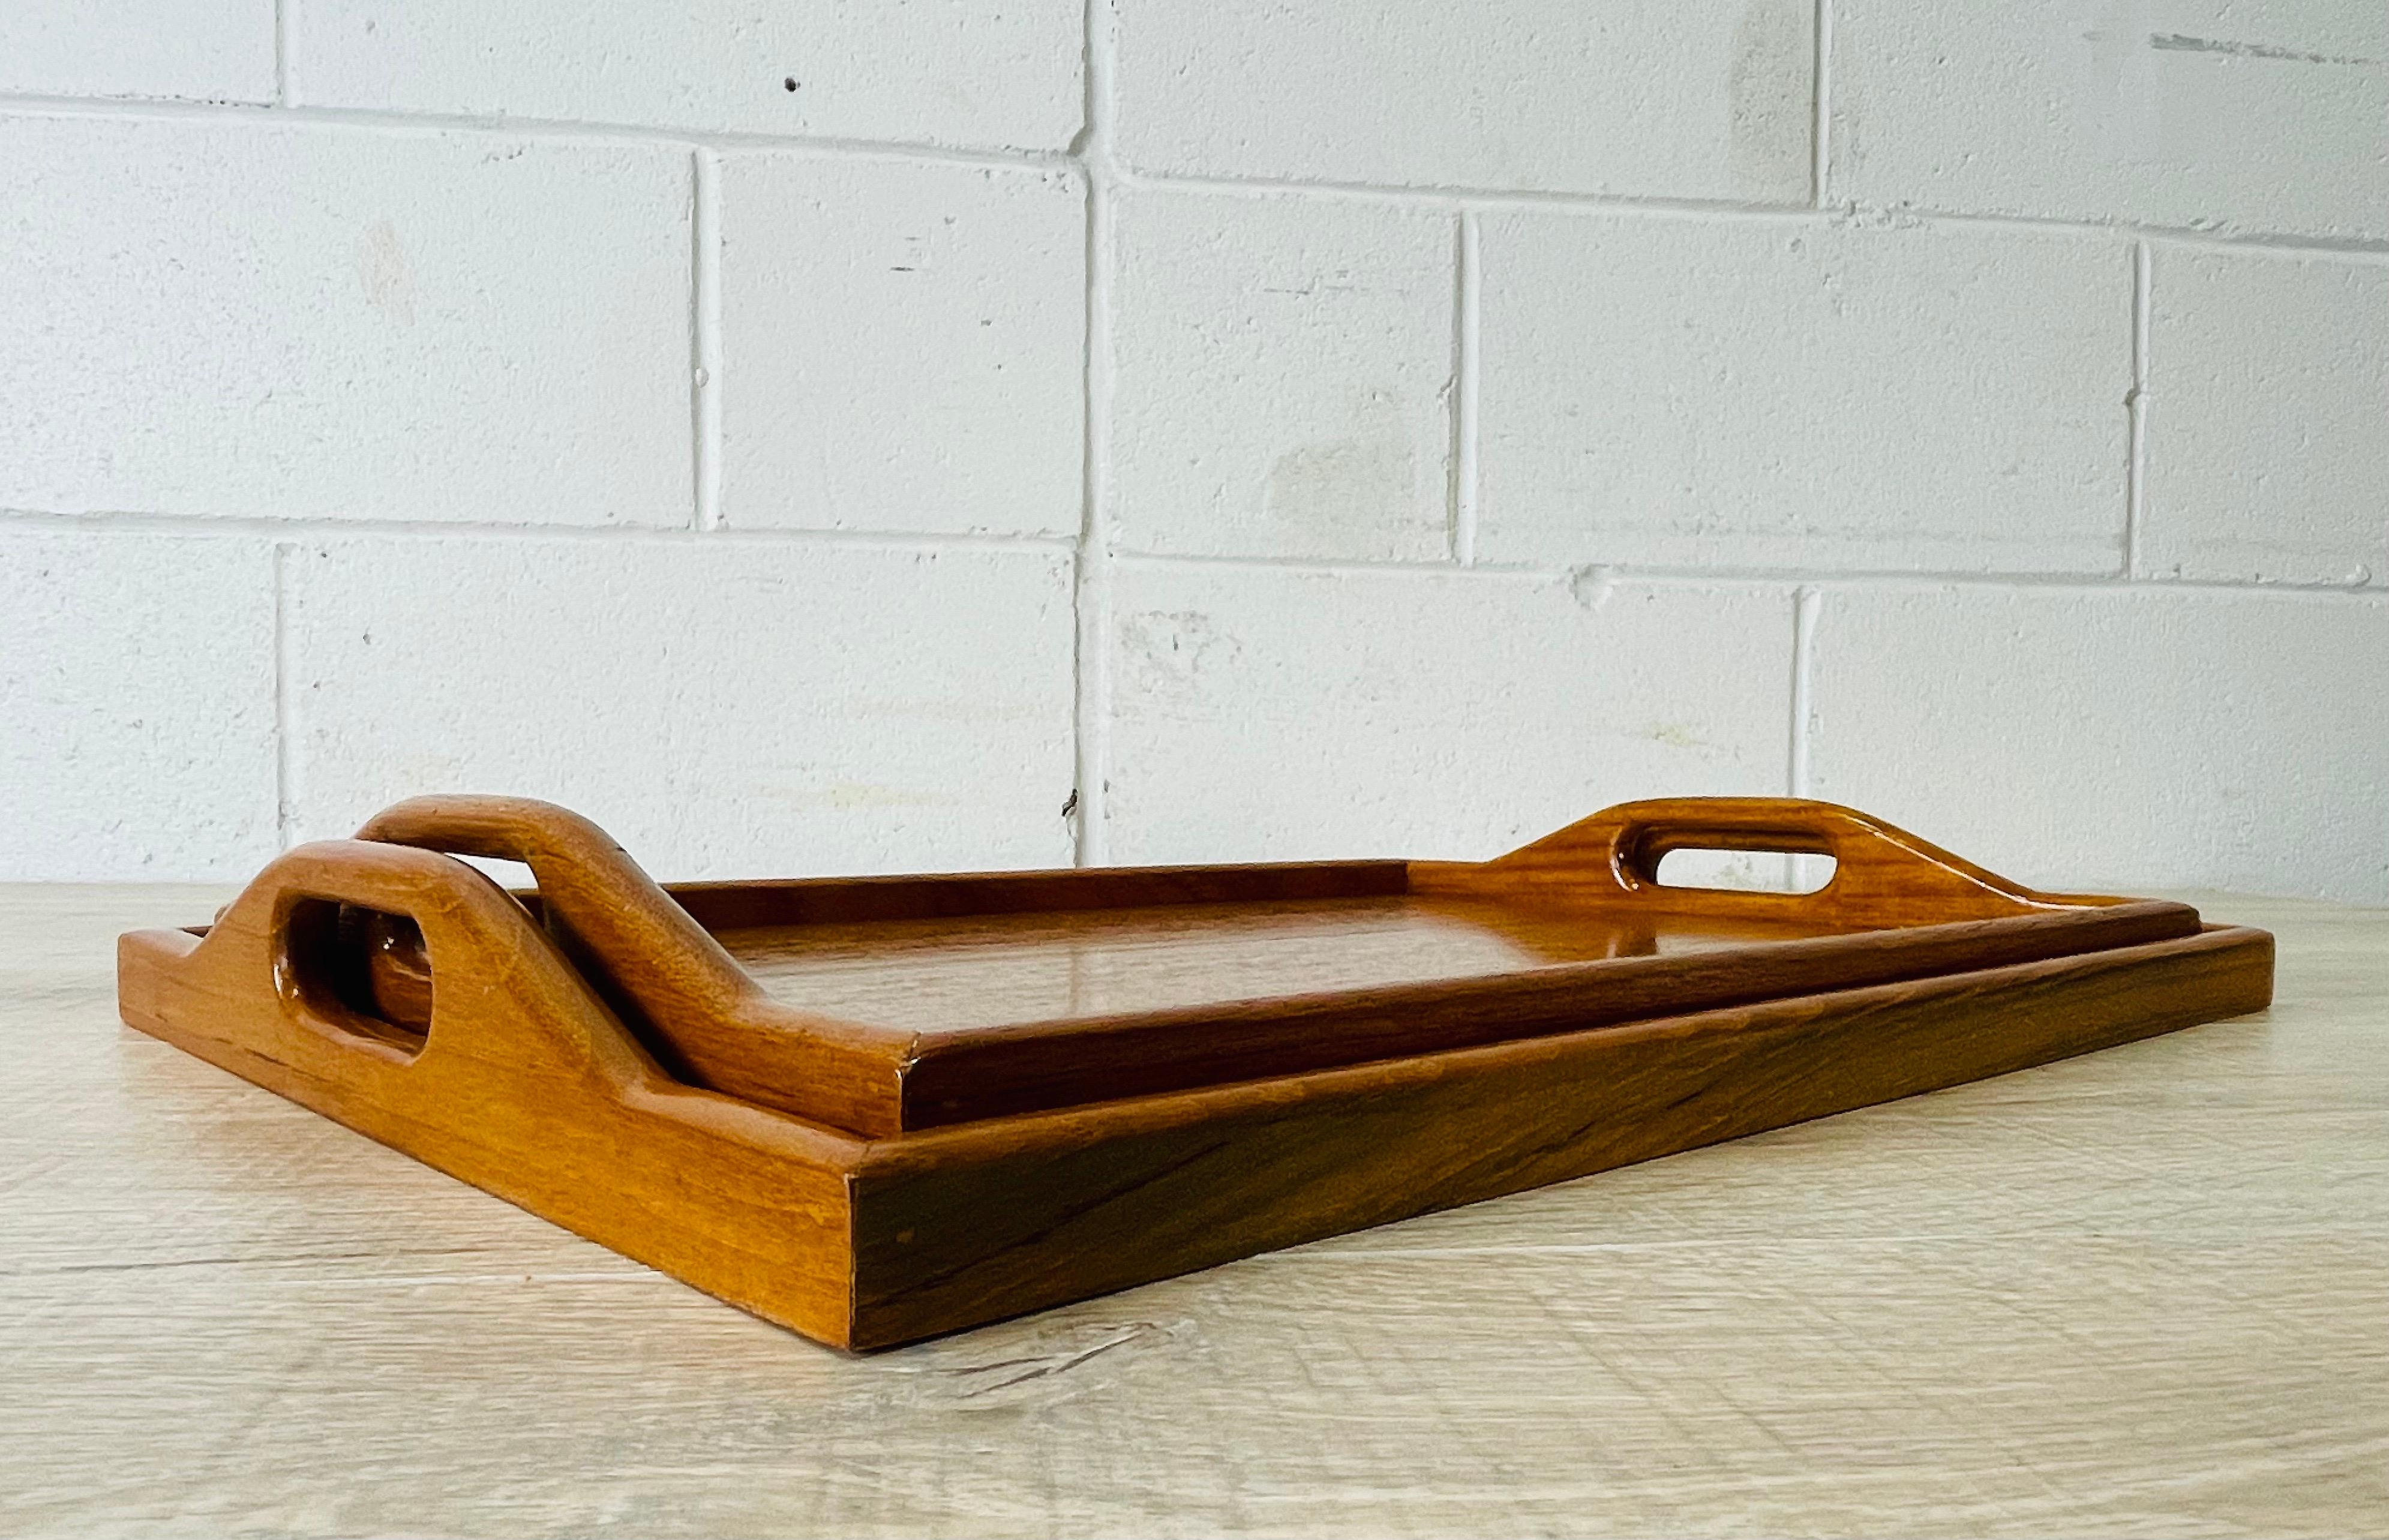 Vintage 1970s pair of handled teak serving trays. Smaller tray measures: 16.75” L x 11.5” W x 2” H. Marked.